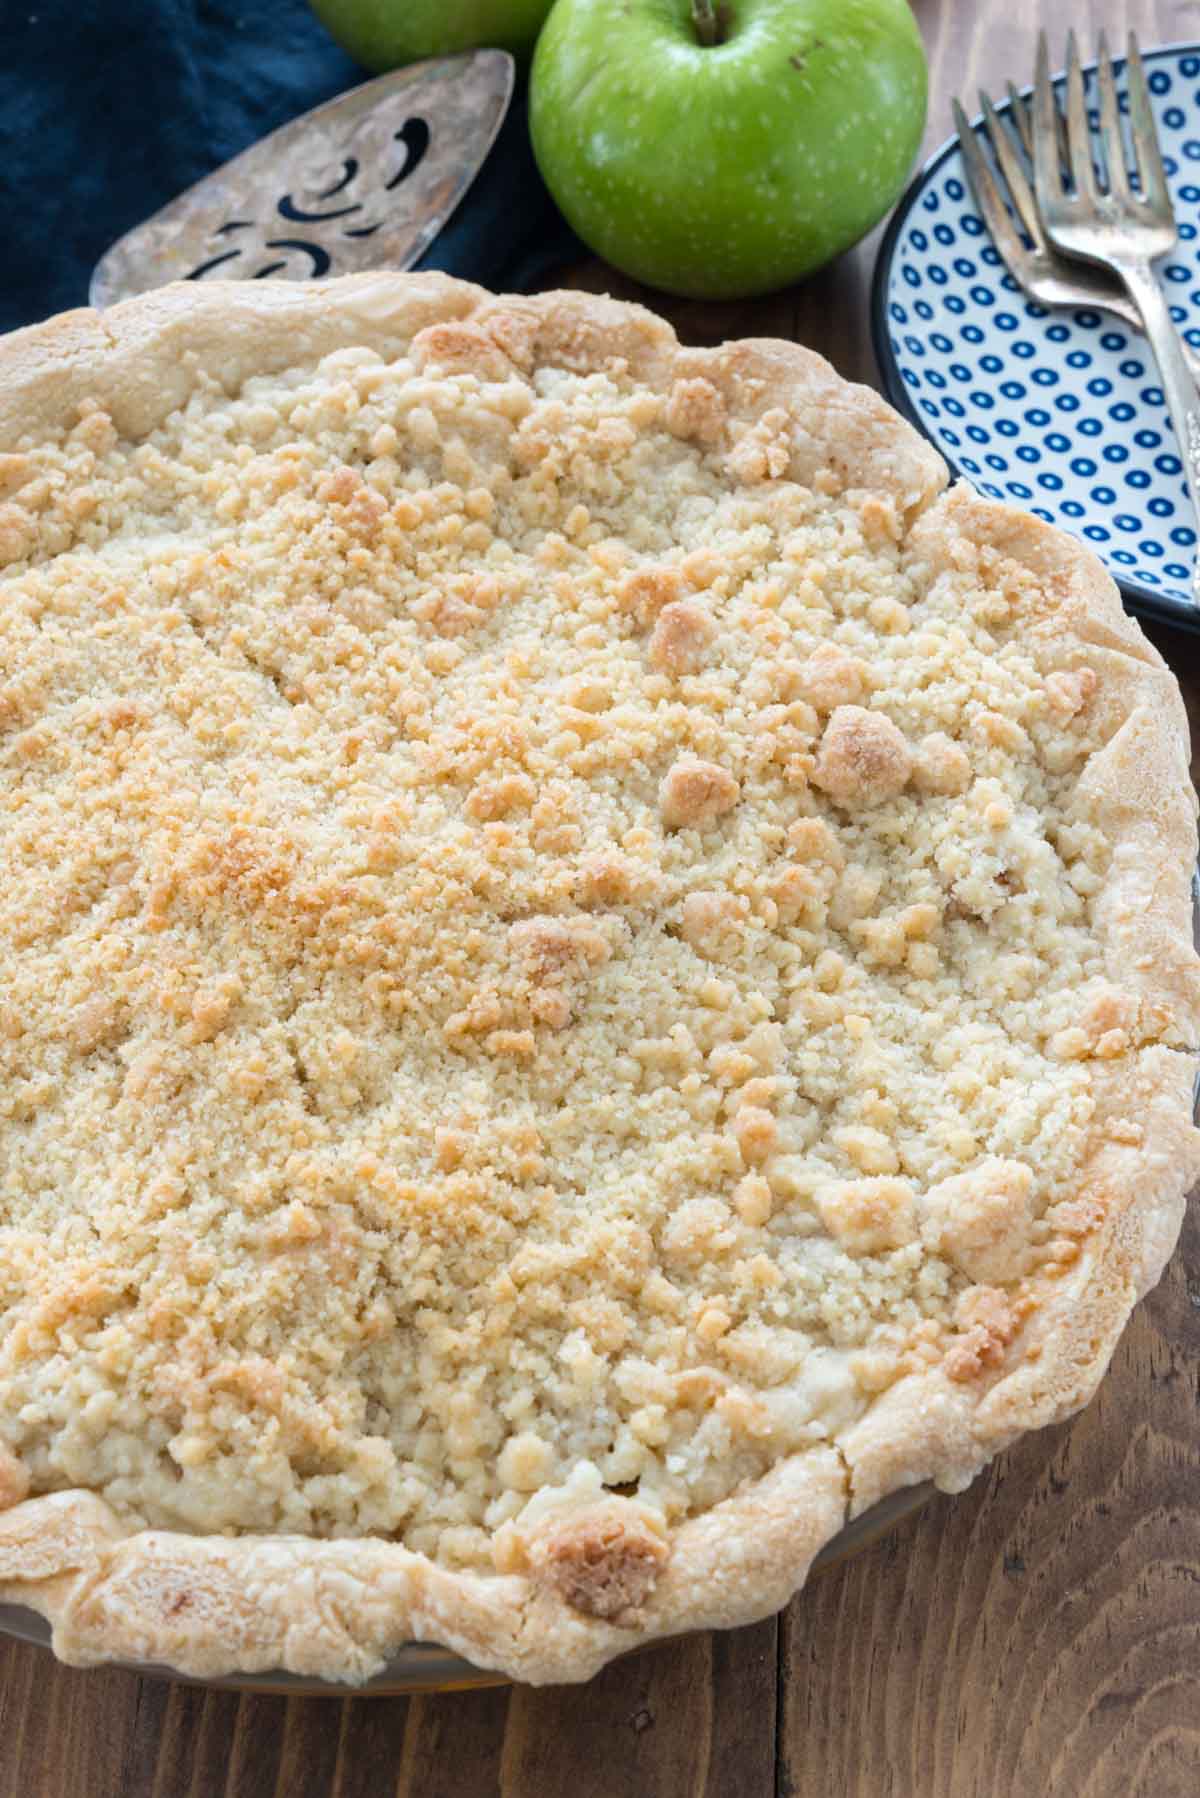 The BEST Crumb Apple Pie Recipe you'll ever eat! This is my signature recipe - the crumble is super crunchy and thick. This easy pie is PERFECT!